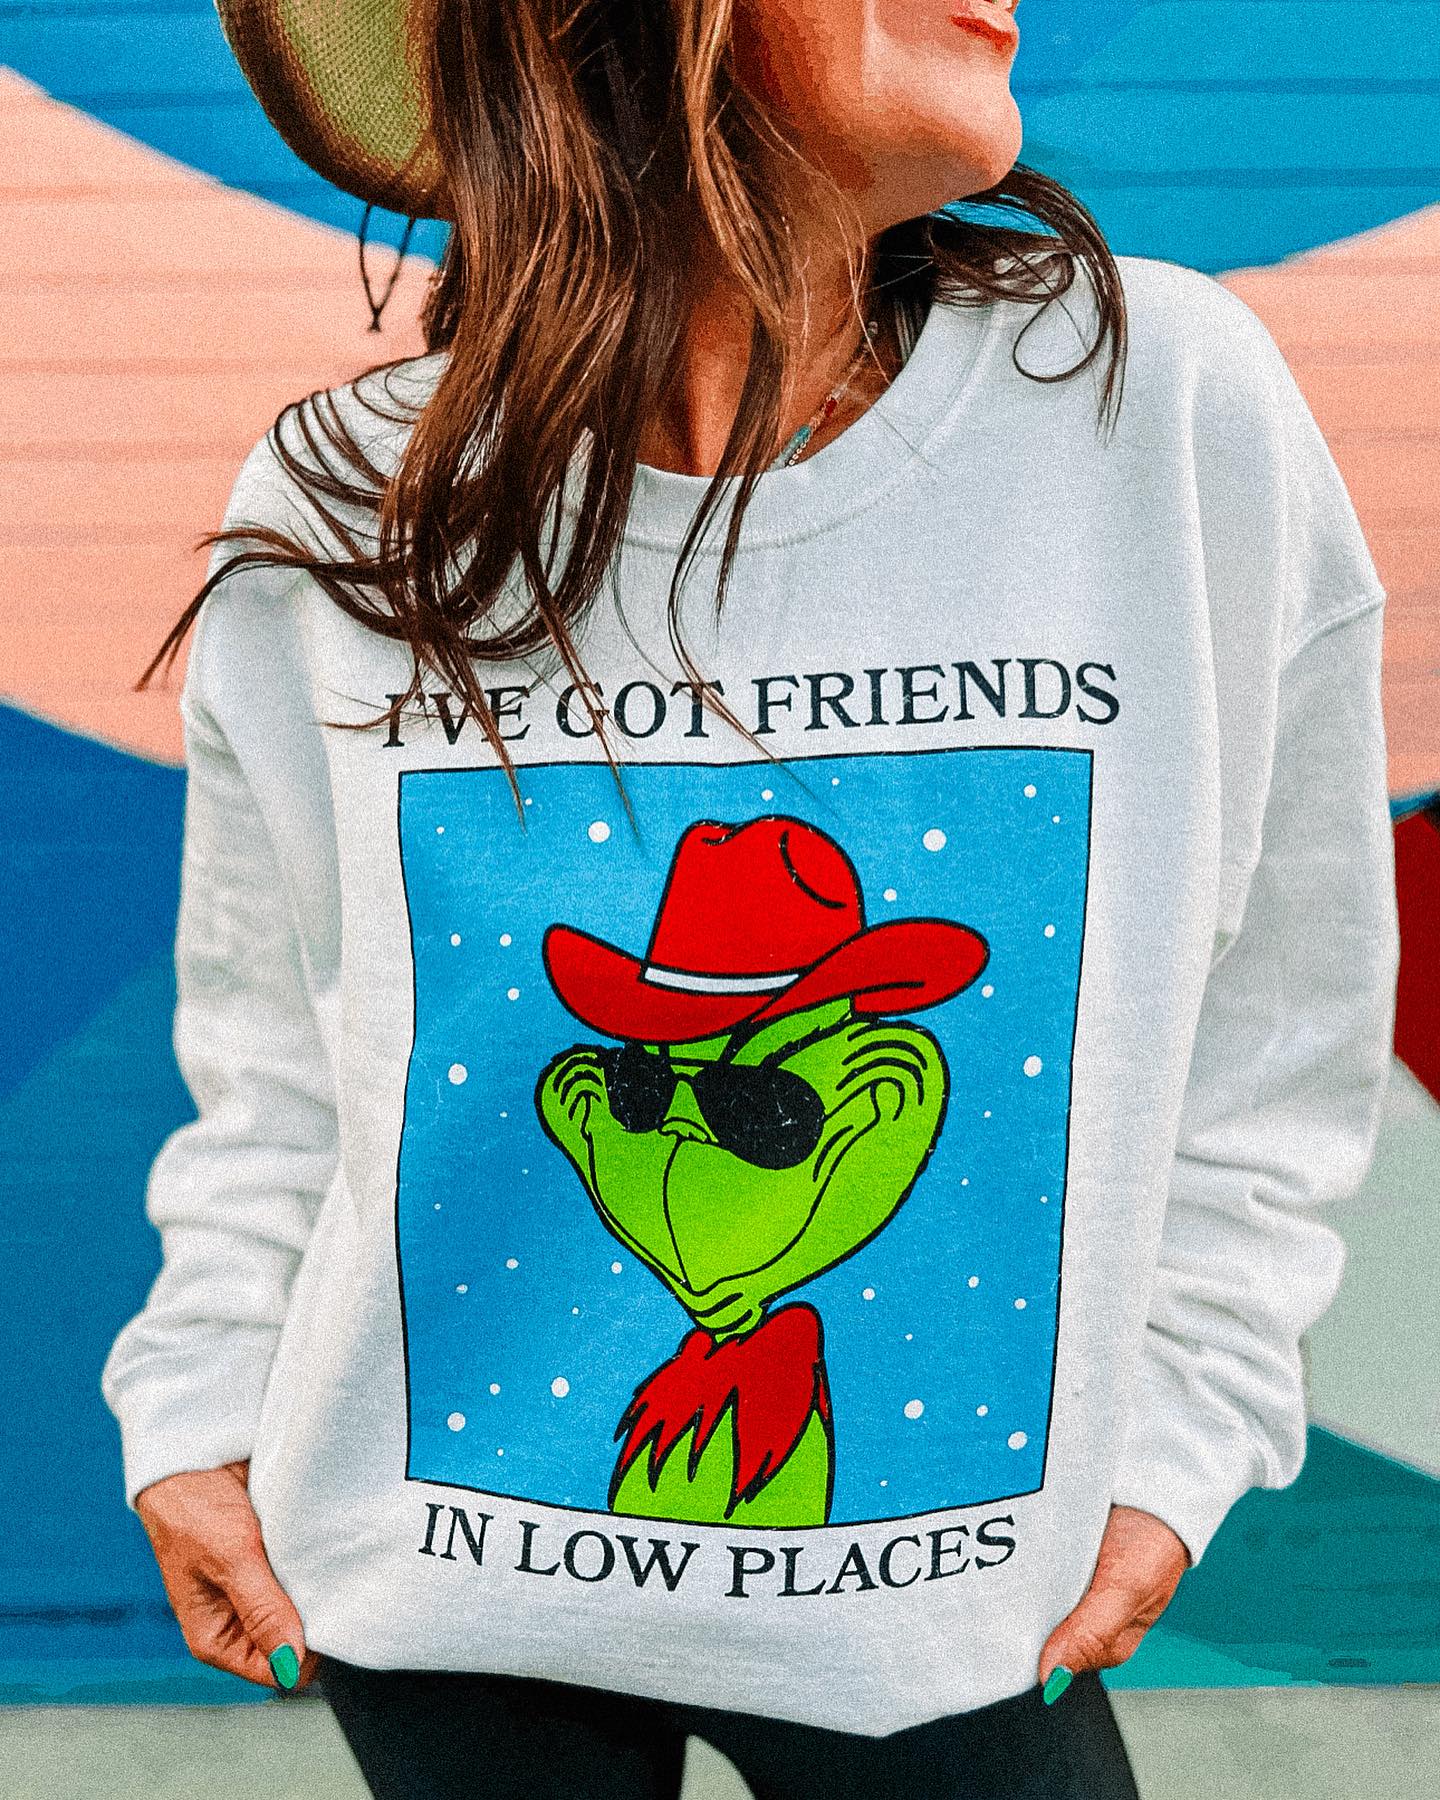 Low Places Pullover